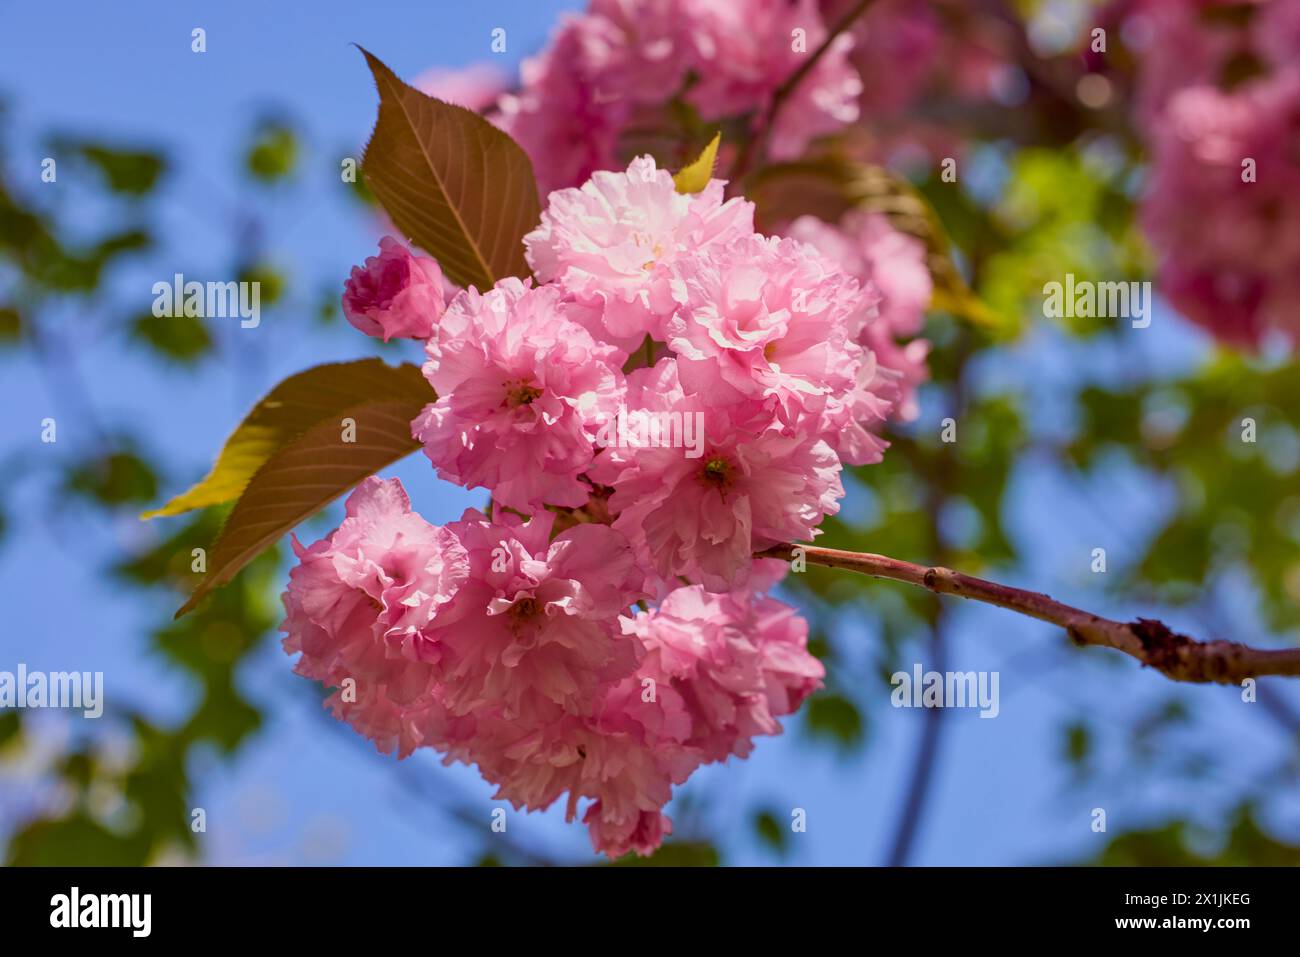 Branch of Prunus Kanzan cherry. Pink double flowers and green leaves in the blue sky background, close up. Stock Photo